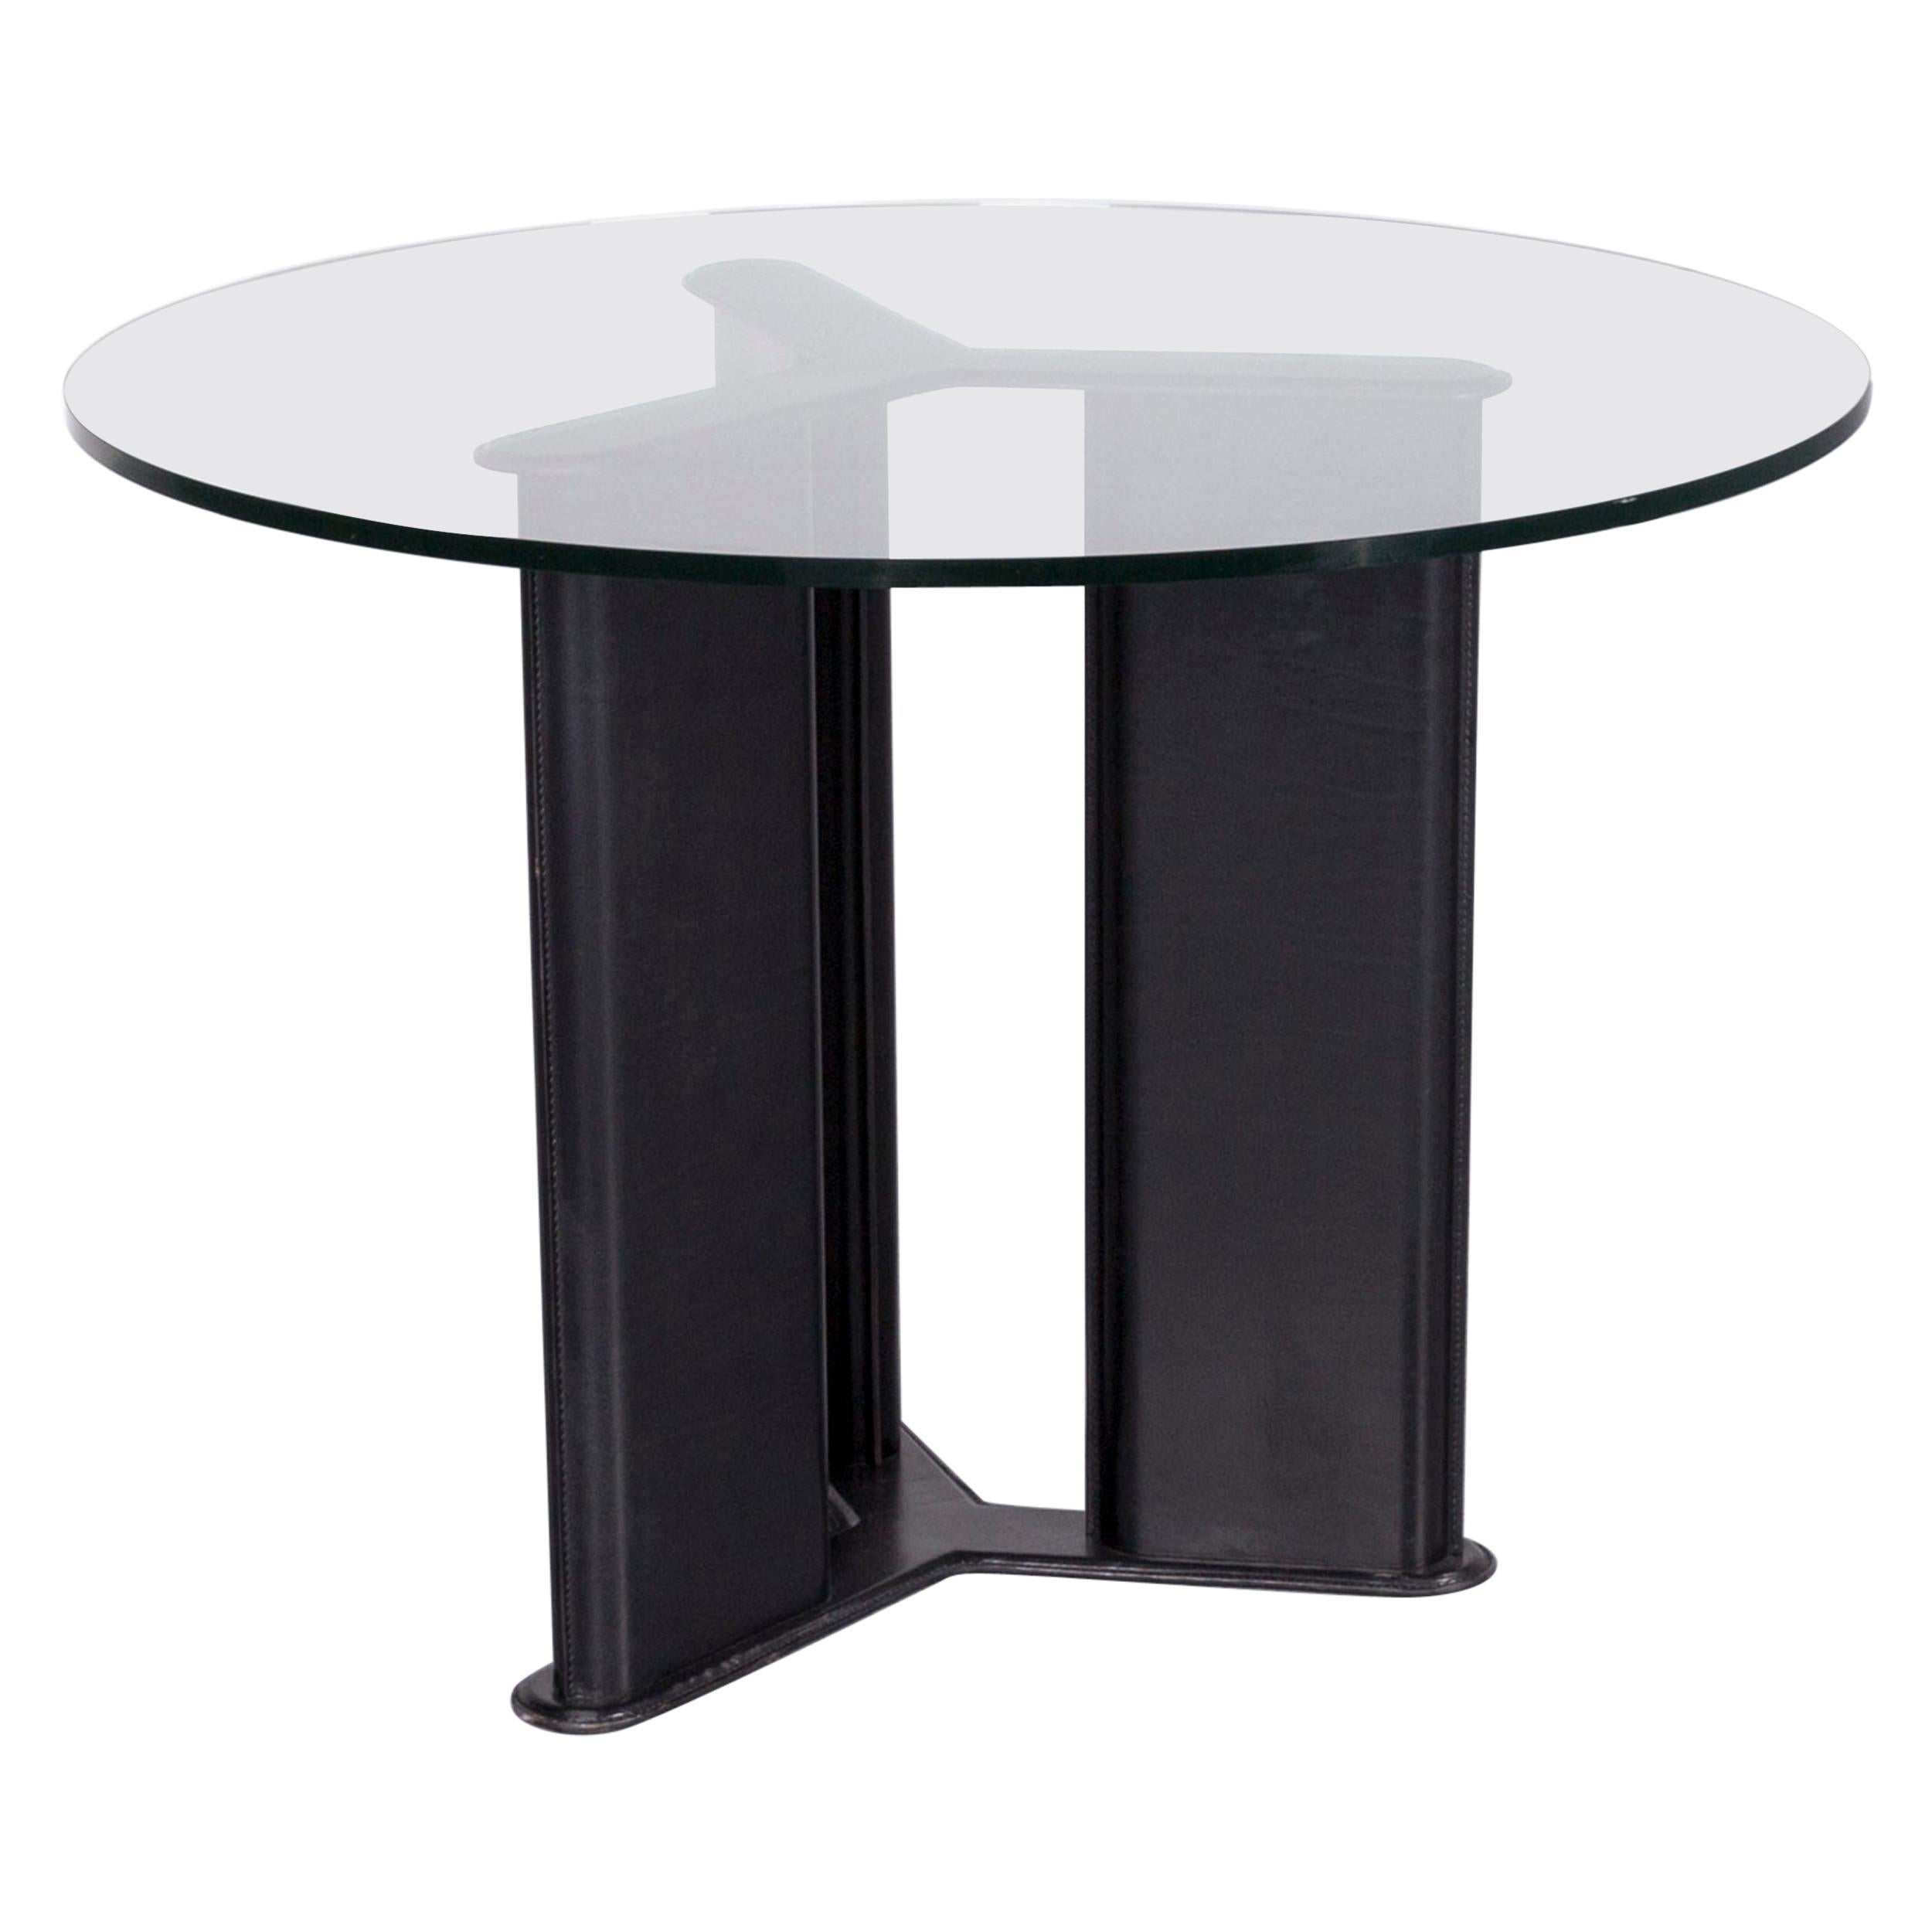 Matteo Grassi Korium Designer Coffee Table Leather Glass Table Glass Table For Sale